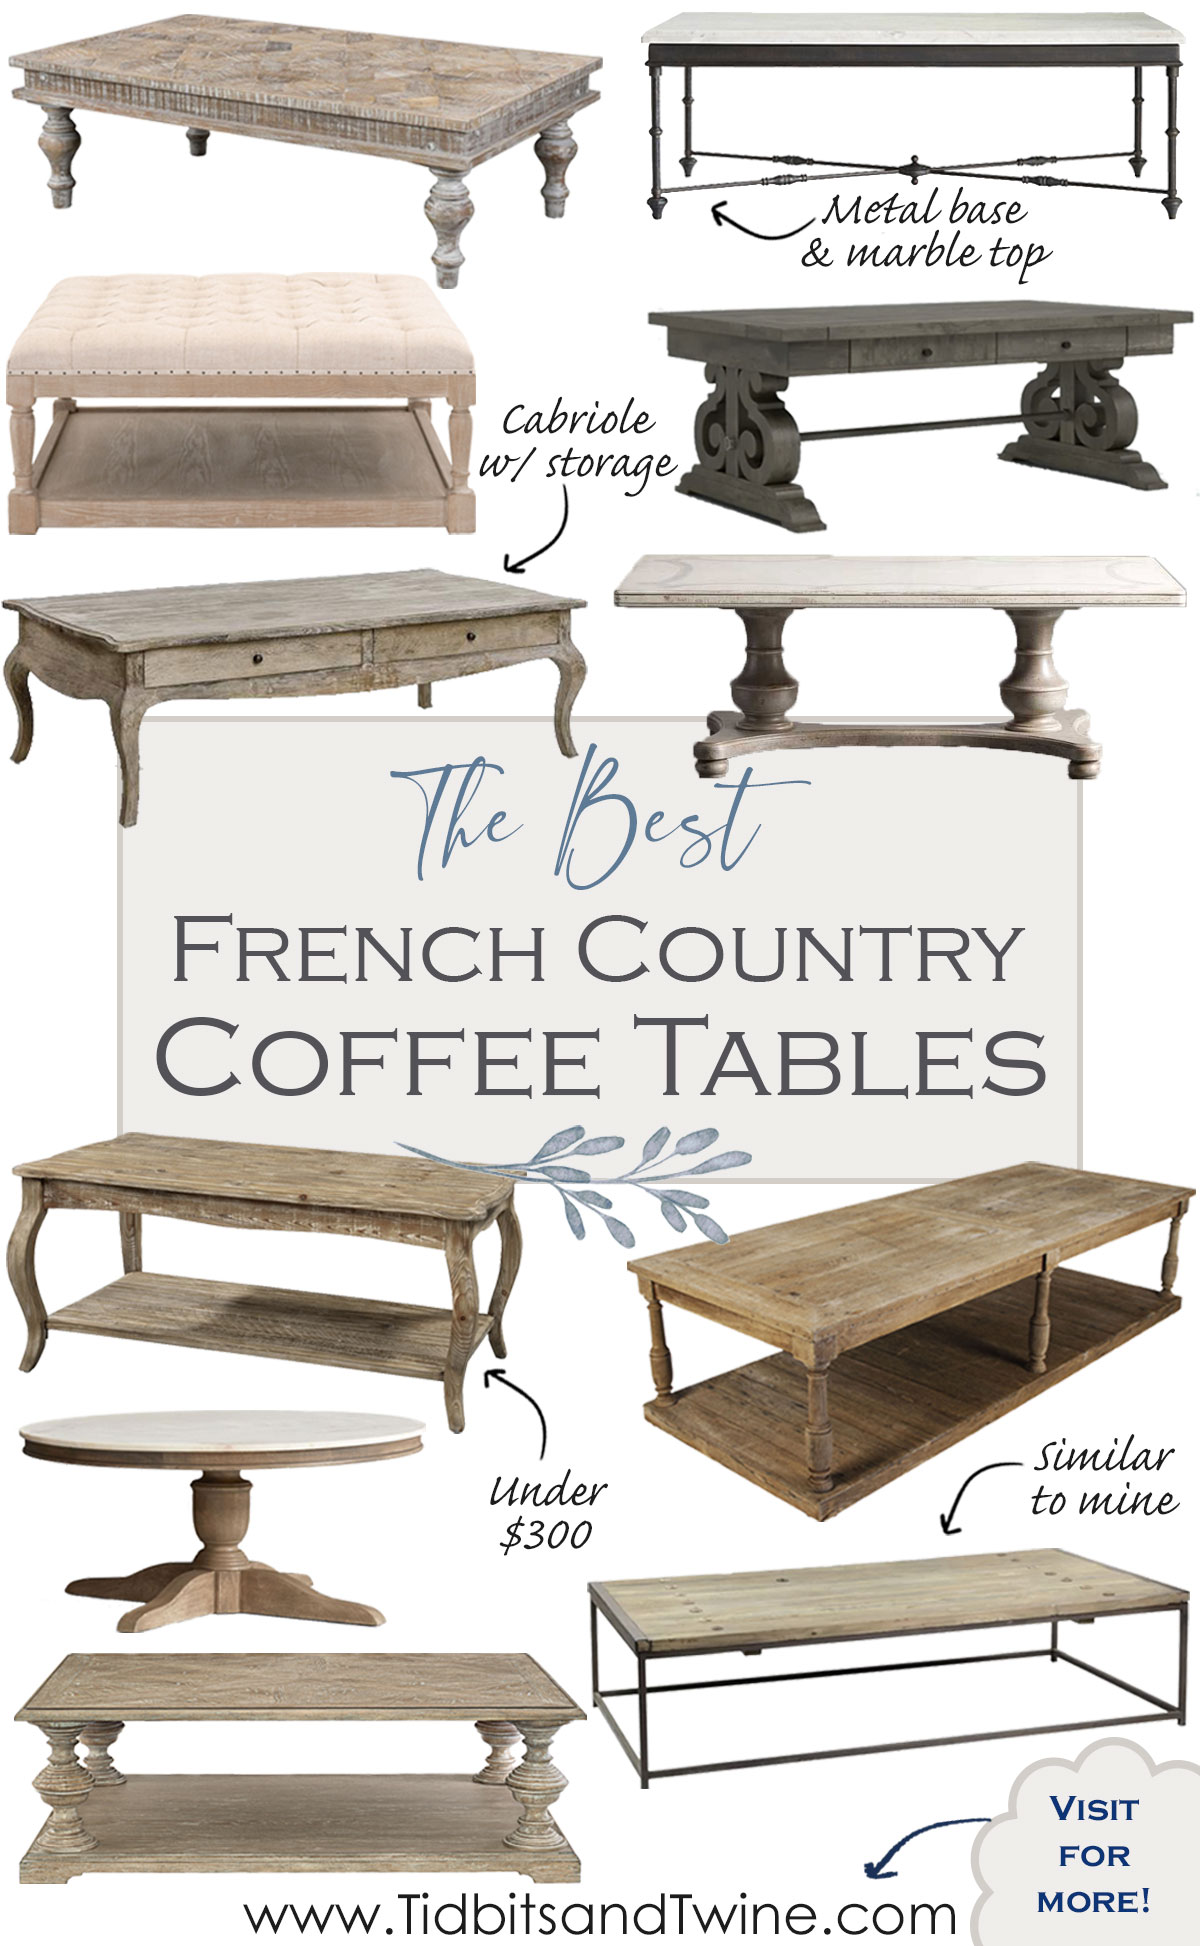 The Best French Country Coffee Tables for Stylish Charm